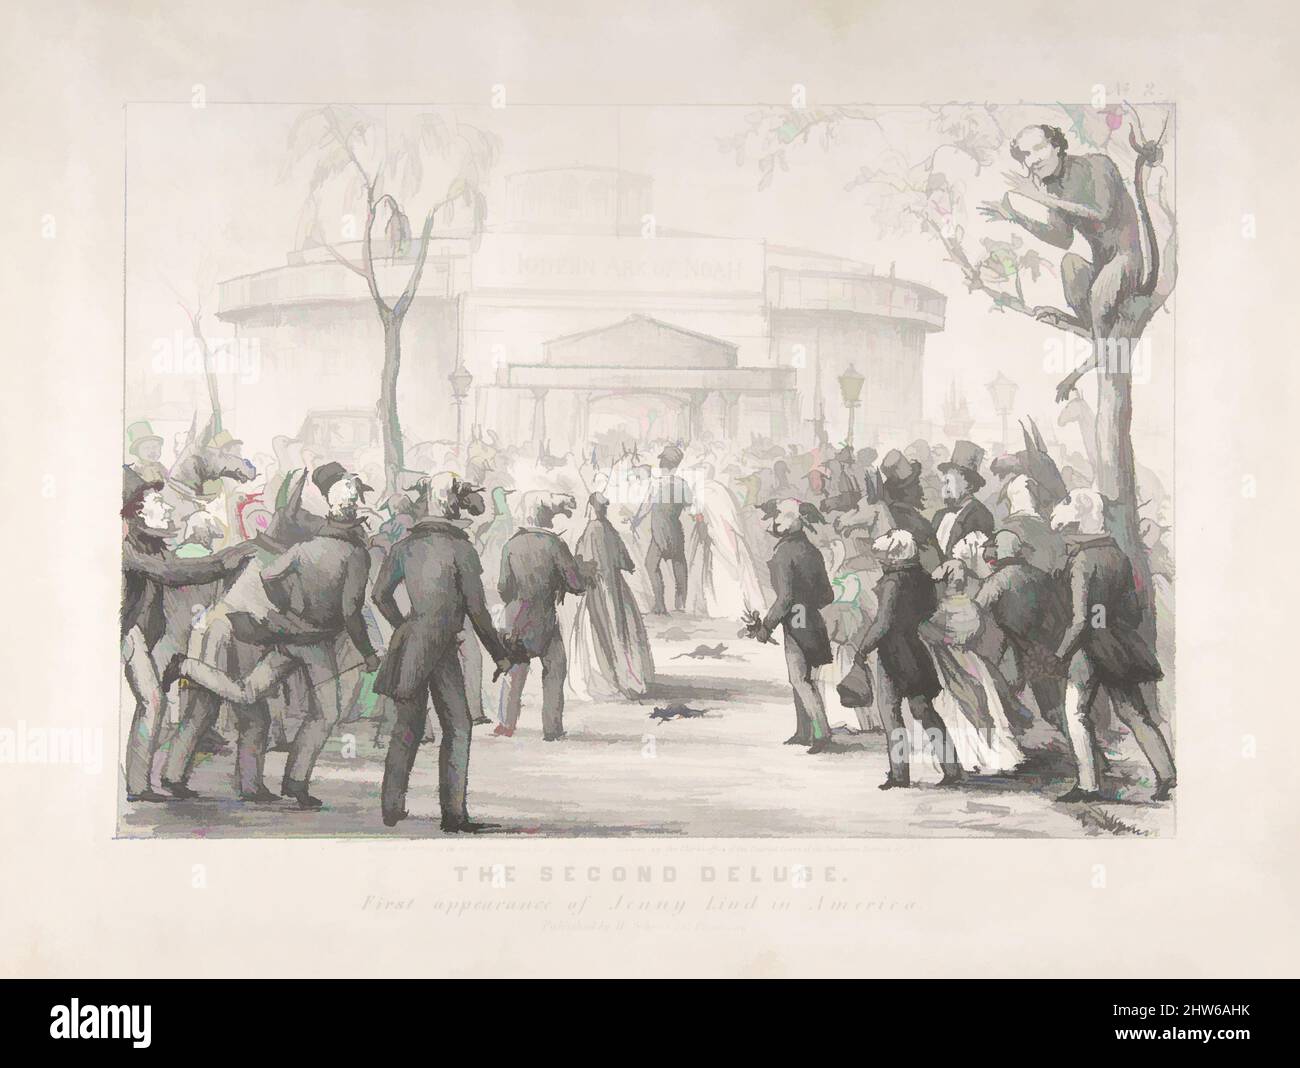 Art inspired by Castle Gardens, The Second Deluge, First Appearance of Jenny Lind in America, 1850, Lithograph, image: 13 7/16 x 9 3/8 in. (34.1 x 23.8 cm), Prints, Anonymous, American, 19th century, Classic works modernized by Artotop with a splash of modernity. Shapes, color and value, eye-catching visual impact on art. Emotions through freedom of artworks in a contemporary way. A timeless message pursuing a wildly creative new direction. Artists turning to the digital medium and creating the Artotop NFT Stock Photo